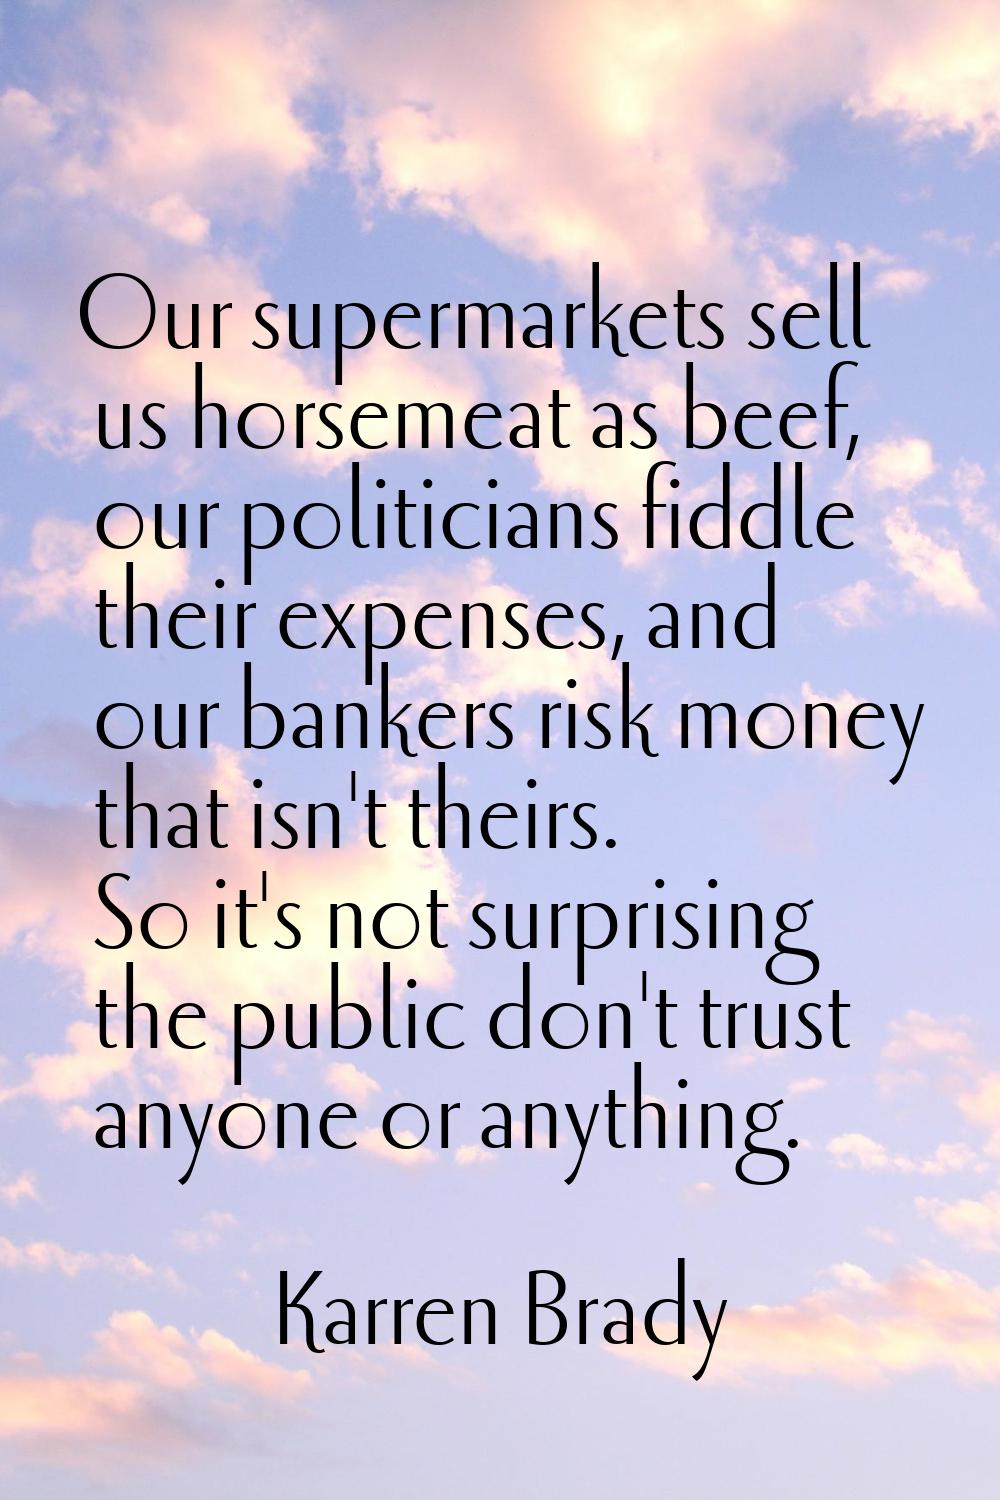 Our supermarkets sell us horsemeat as beef, our politicians fiddle their expenses, and our bankers 